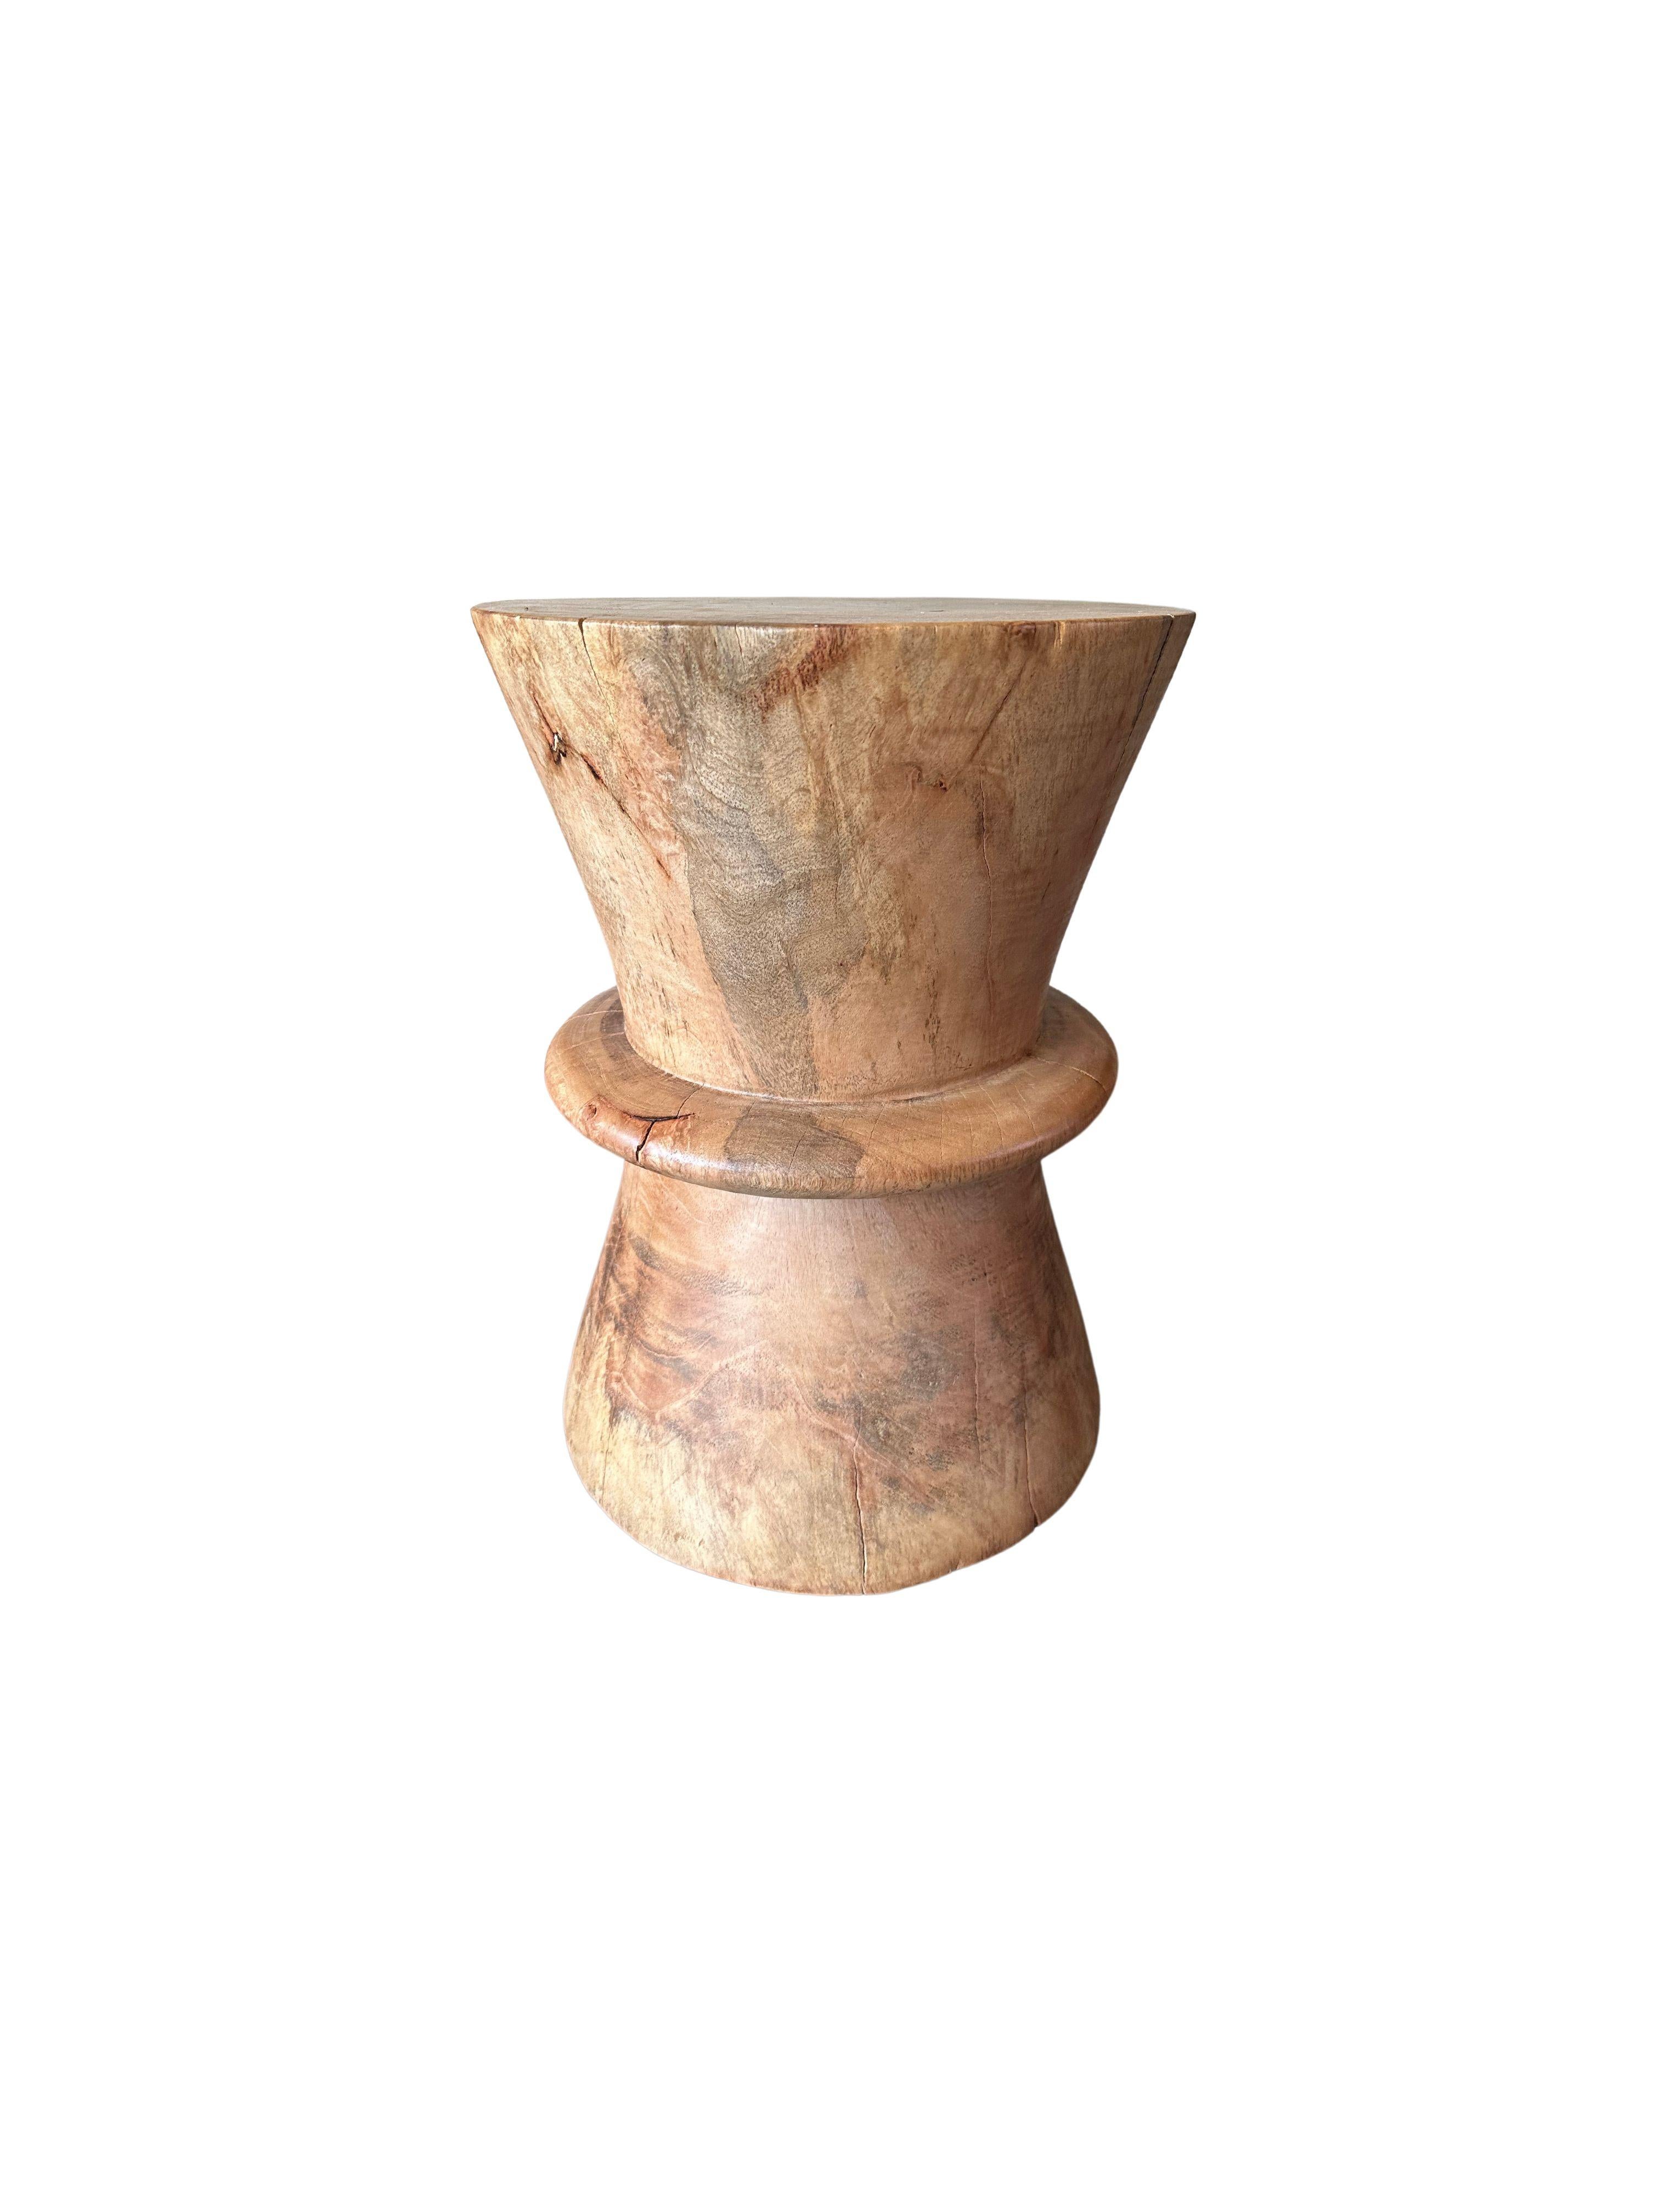 Indonesian Sculptural Side Table Solid Mango Wood, Modern Organic For Sale